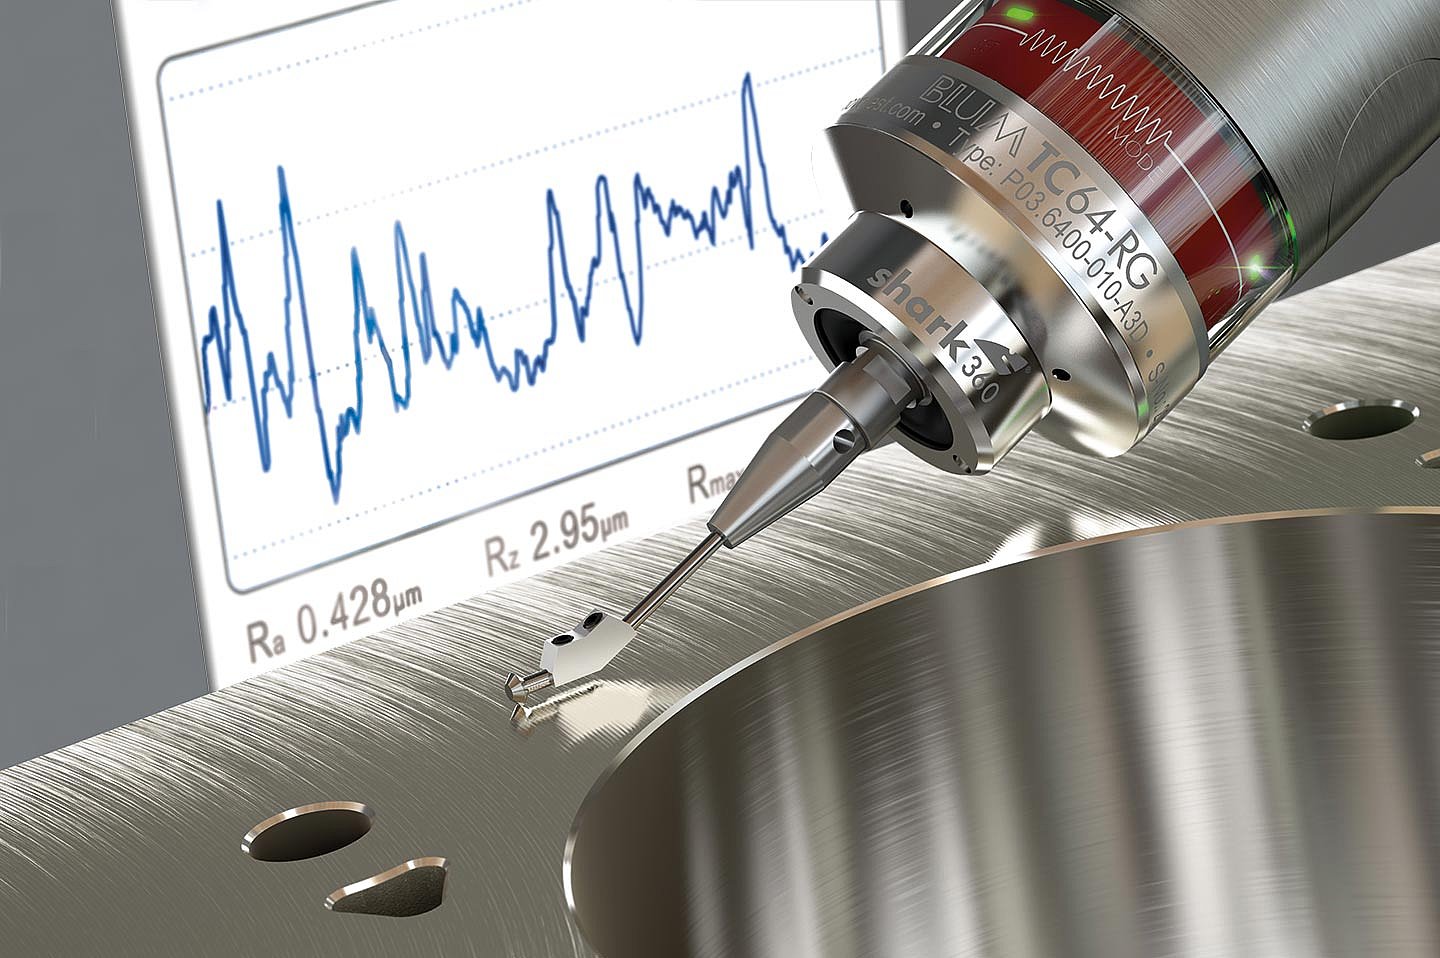 Measurement of the surface roughness of workpieces with BLUM surface roughness gauges